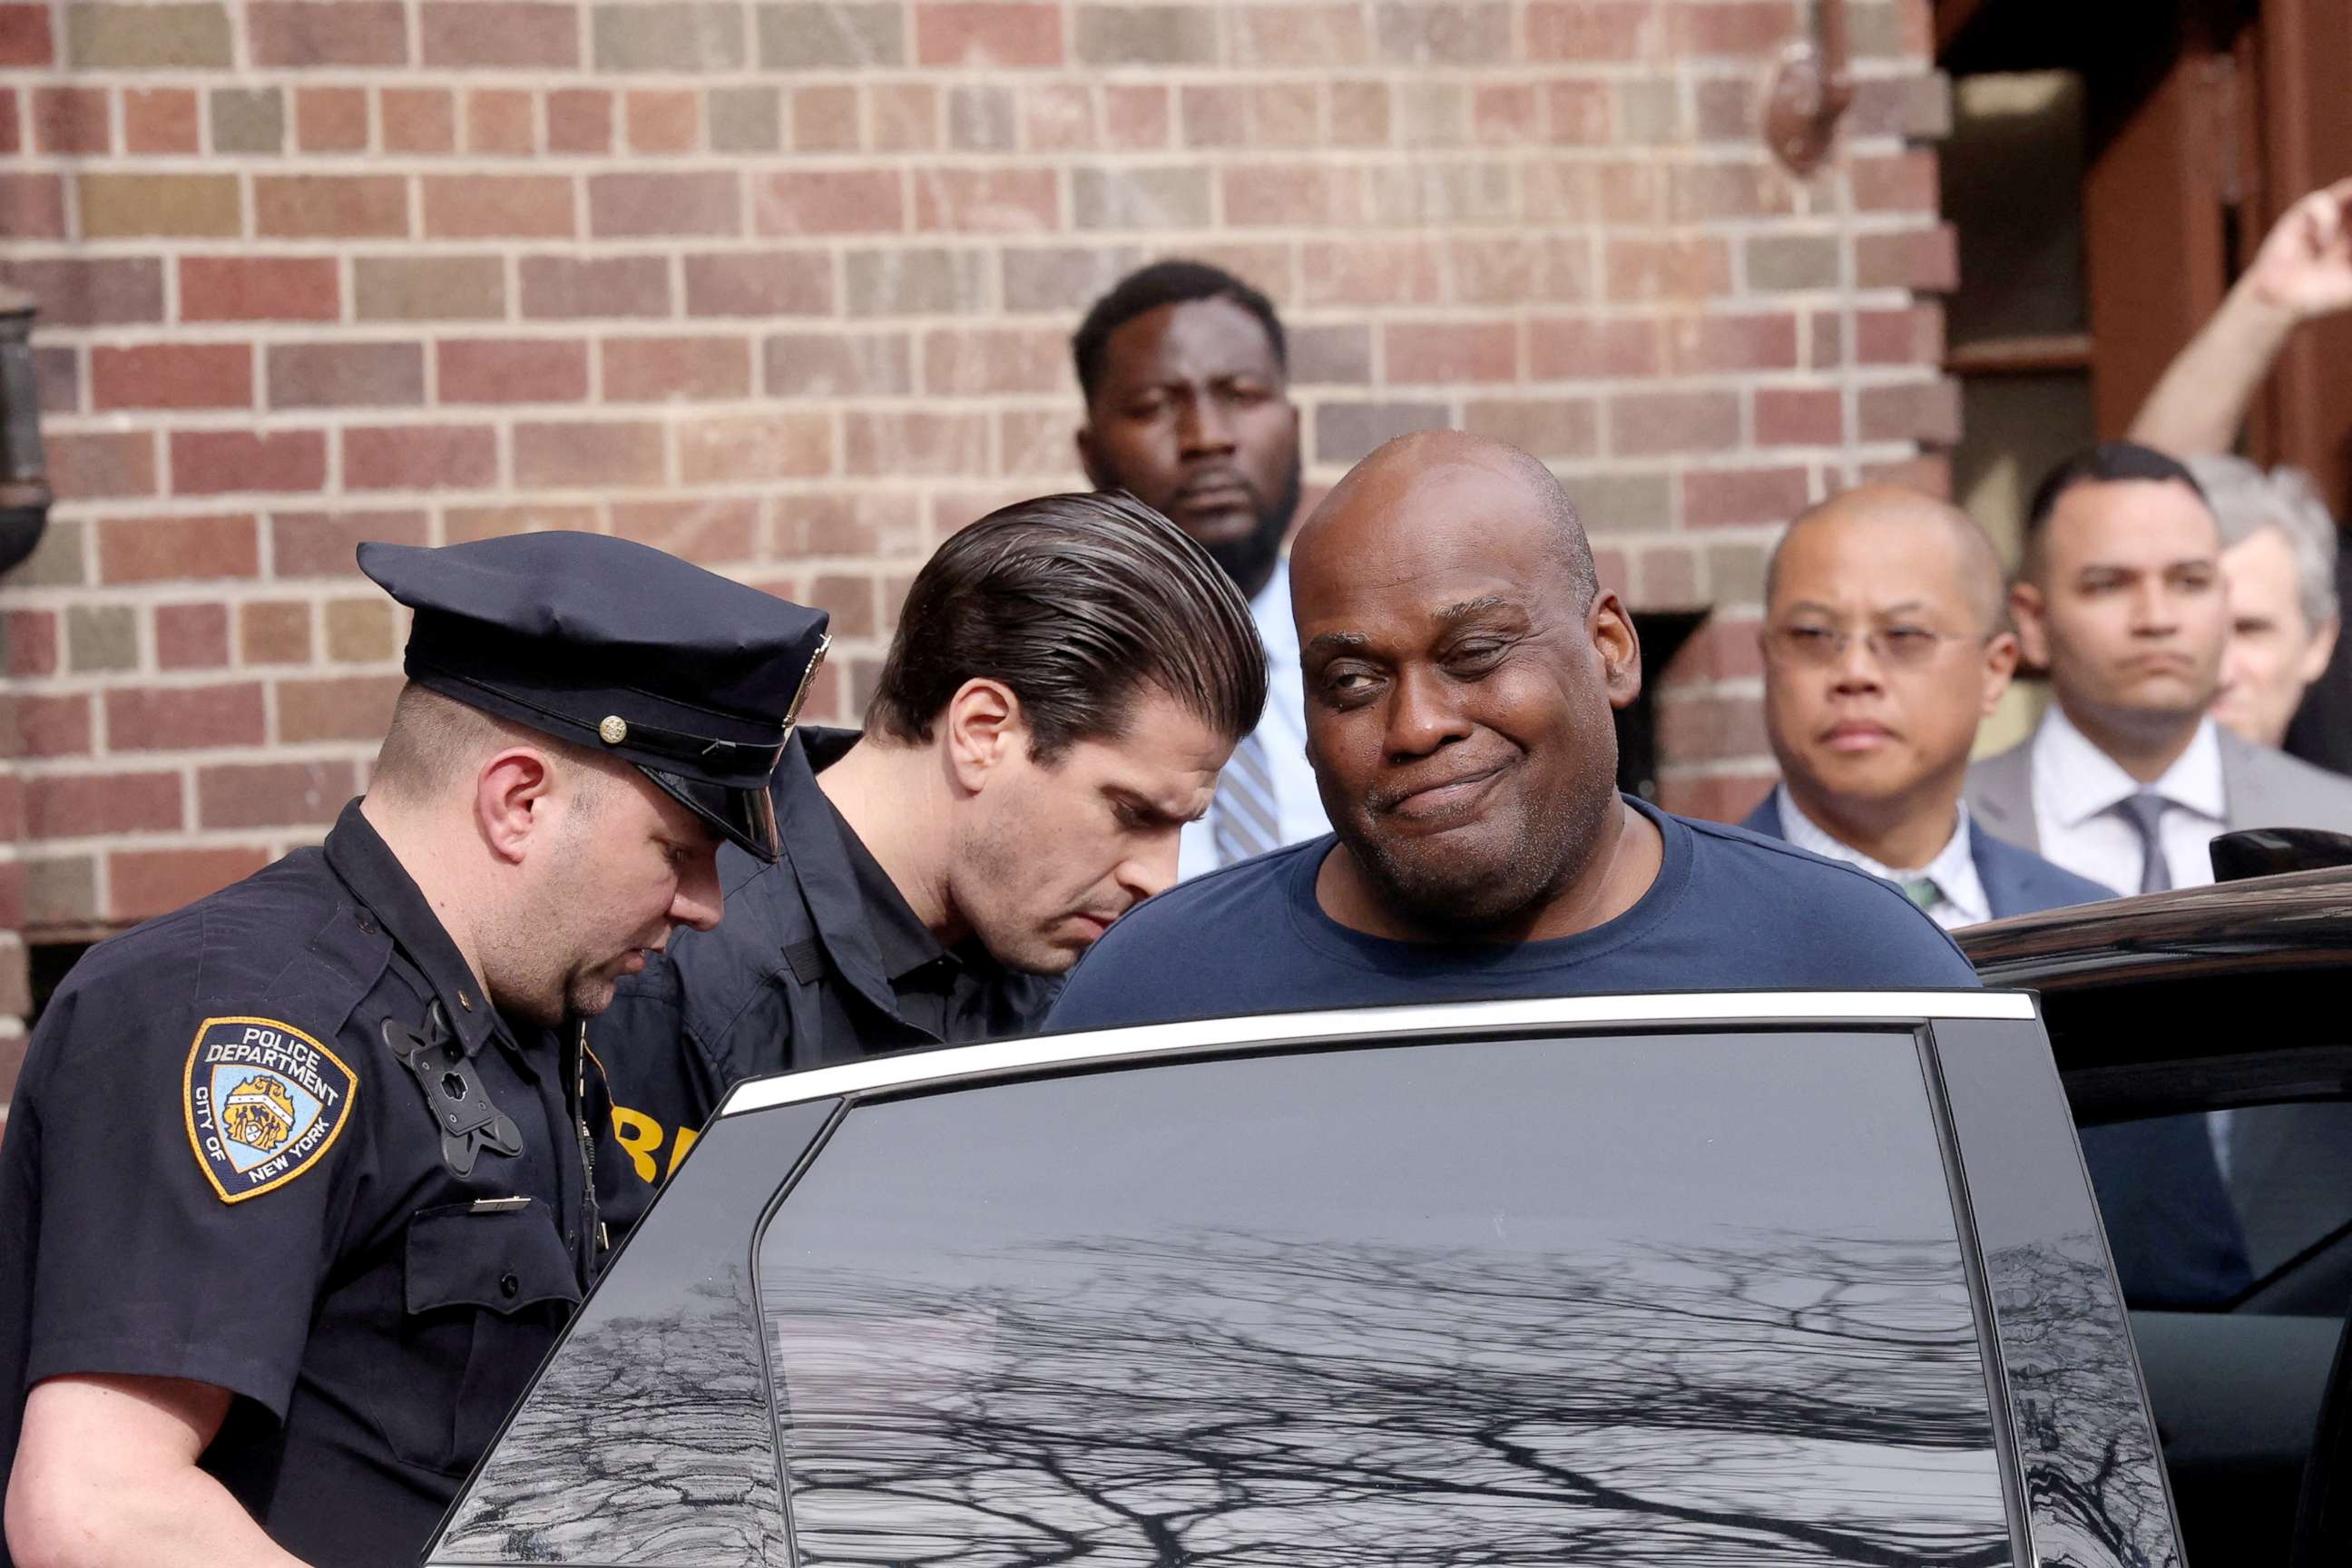 PHOTO: Frank James, the suspect in the Brooklyn subway shooting, reacts as he is escorted to a vehicle after leaving an NYPD precinct in New York, April 13, 2022.